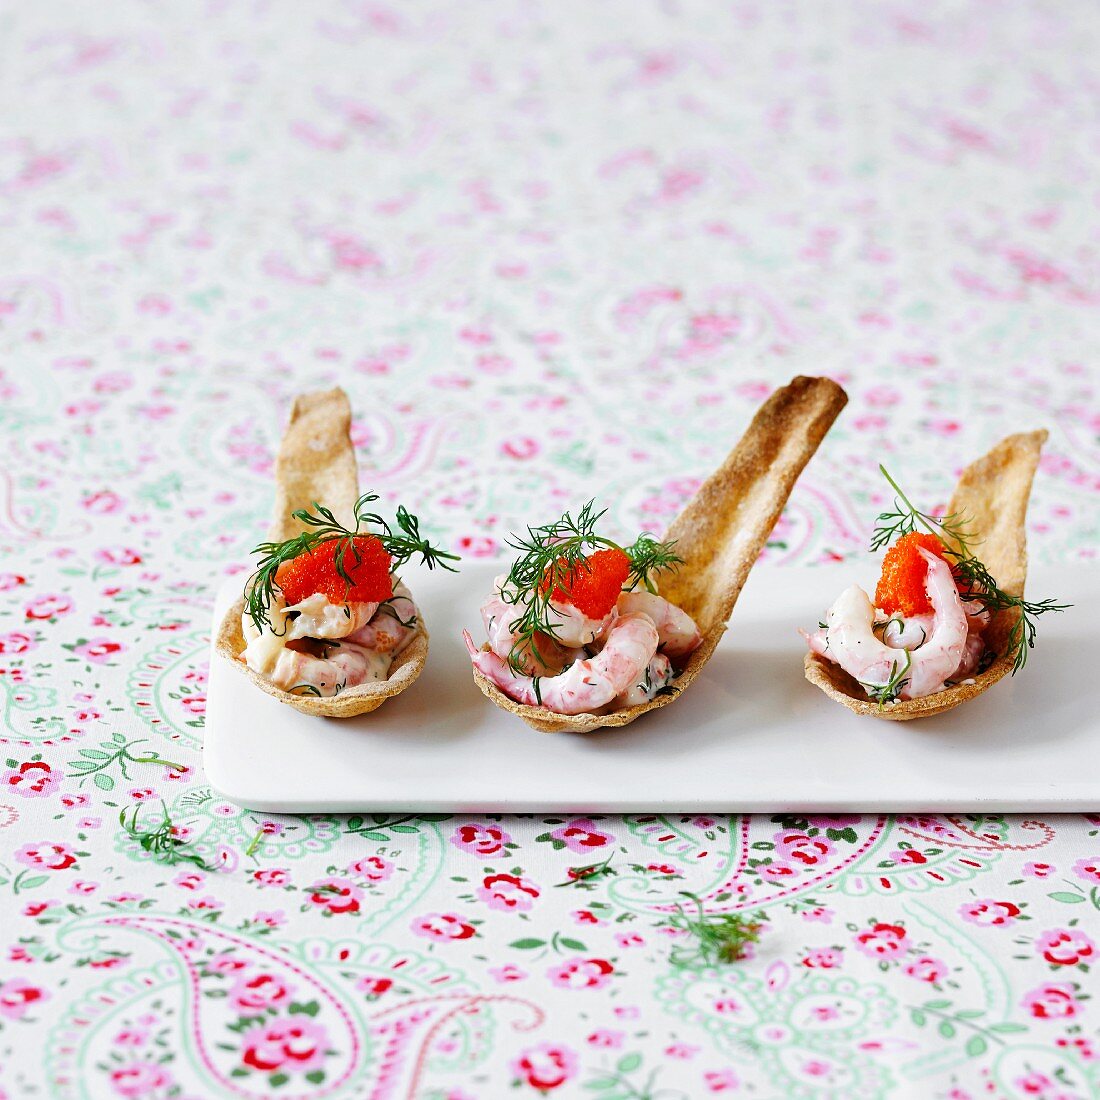 Prawn salad with caviar and dill on baked spoons as spoon canapes